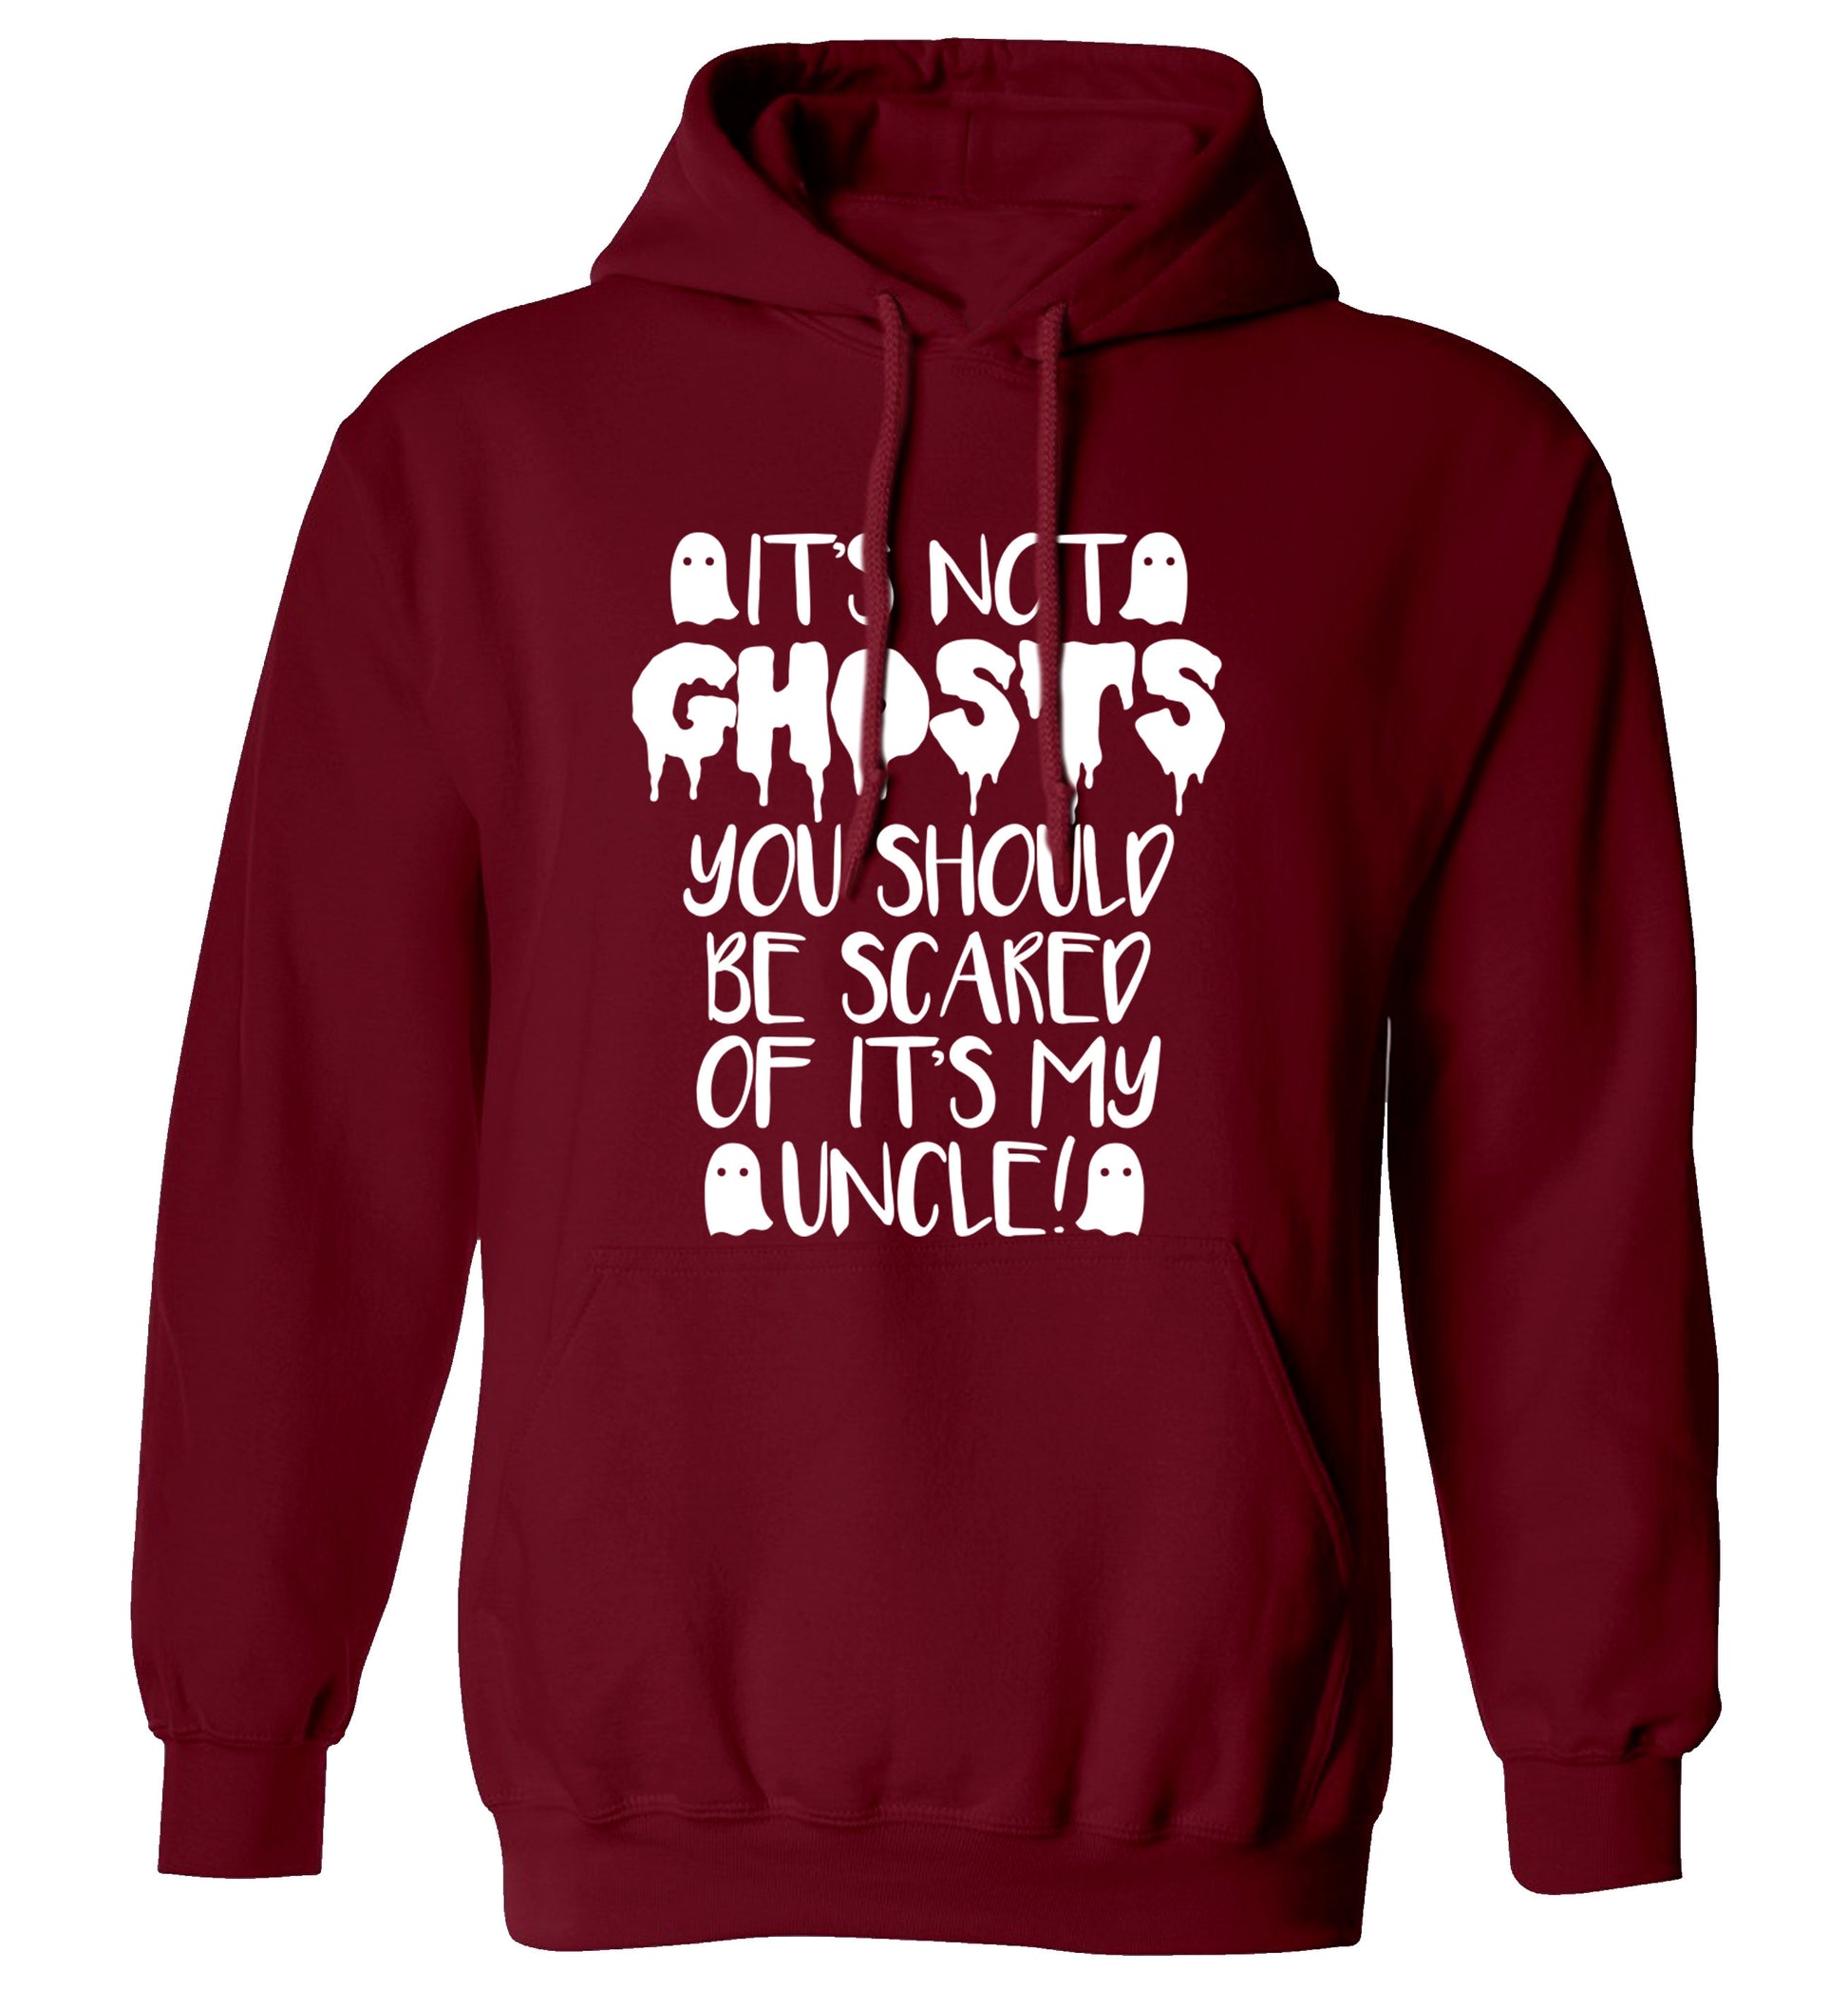 It's not ghosts you should be scared of it's my uncle! adults unisex maroon hoodie 2XL